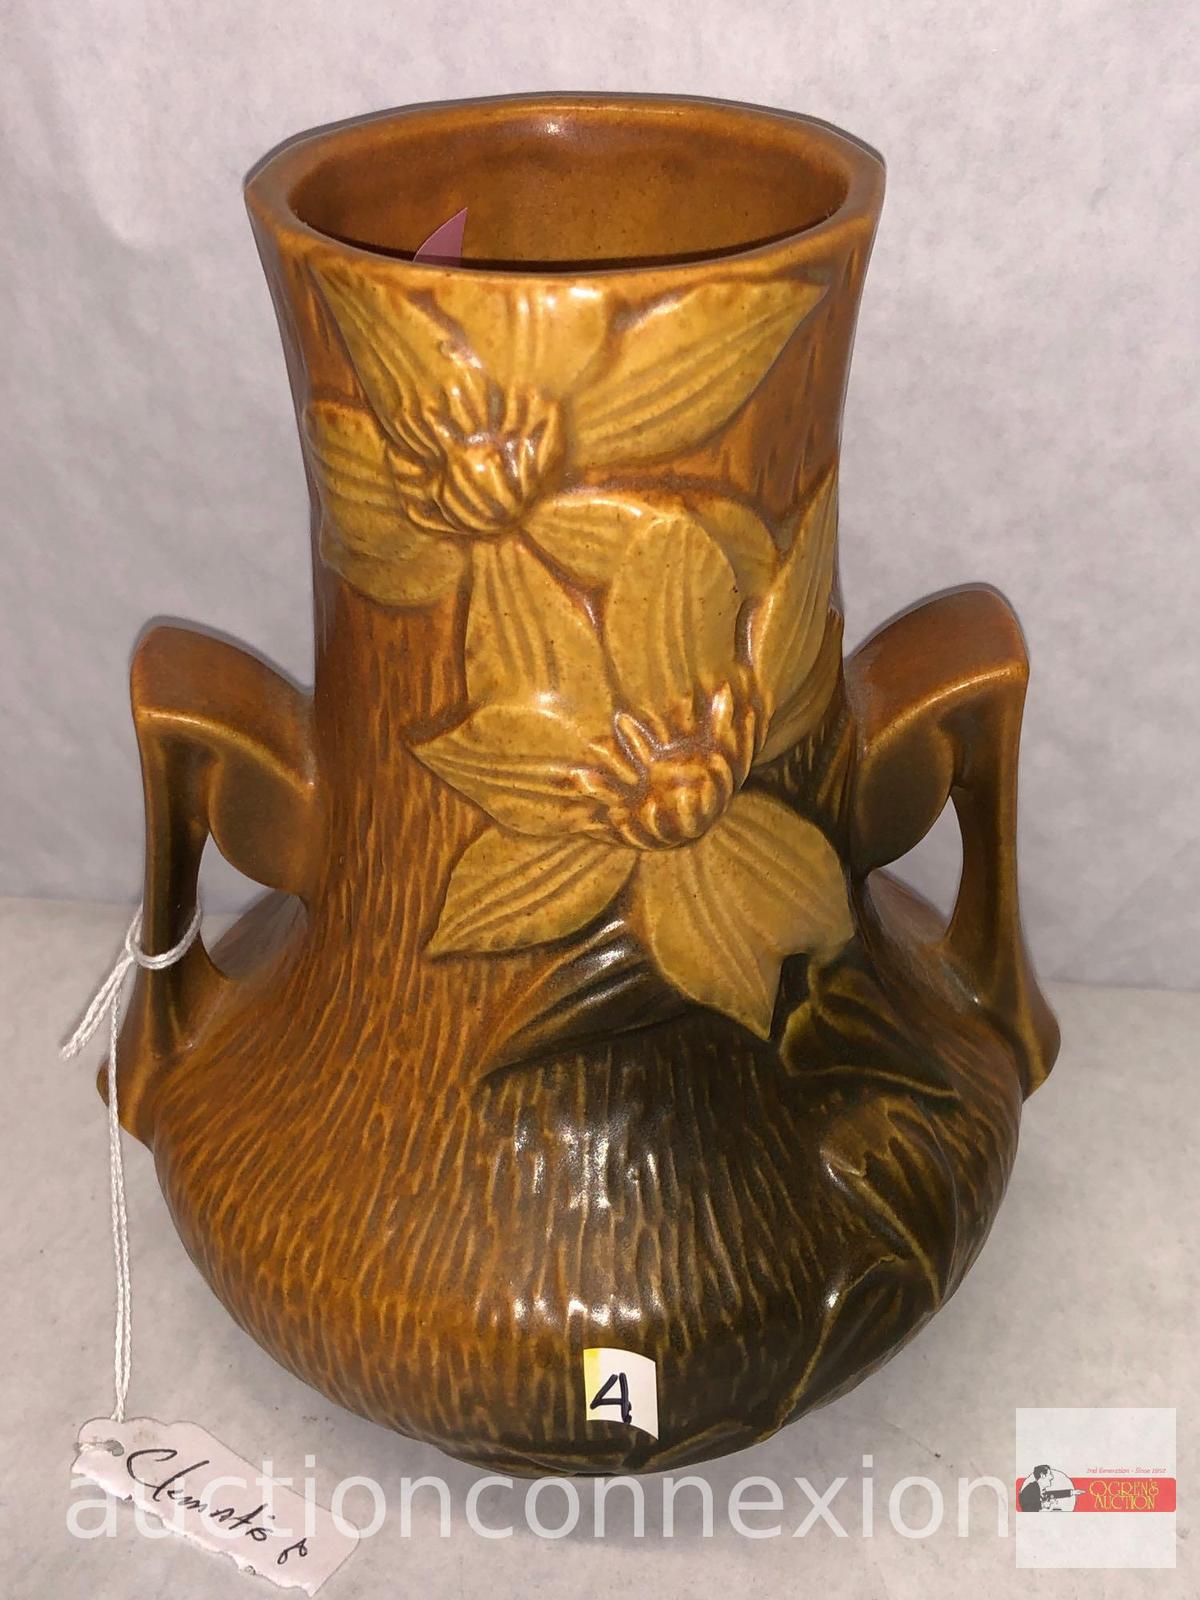 Pottery - Roseville - USA #106-7, brown